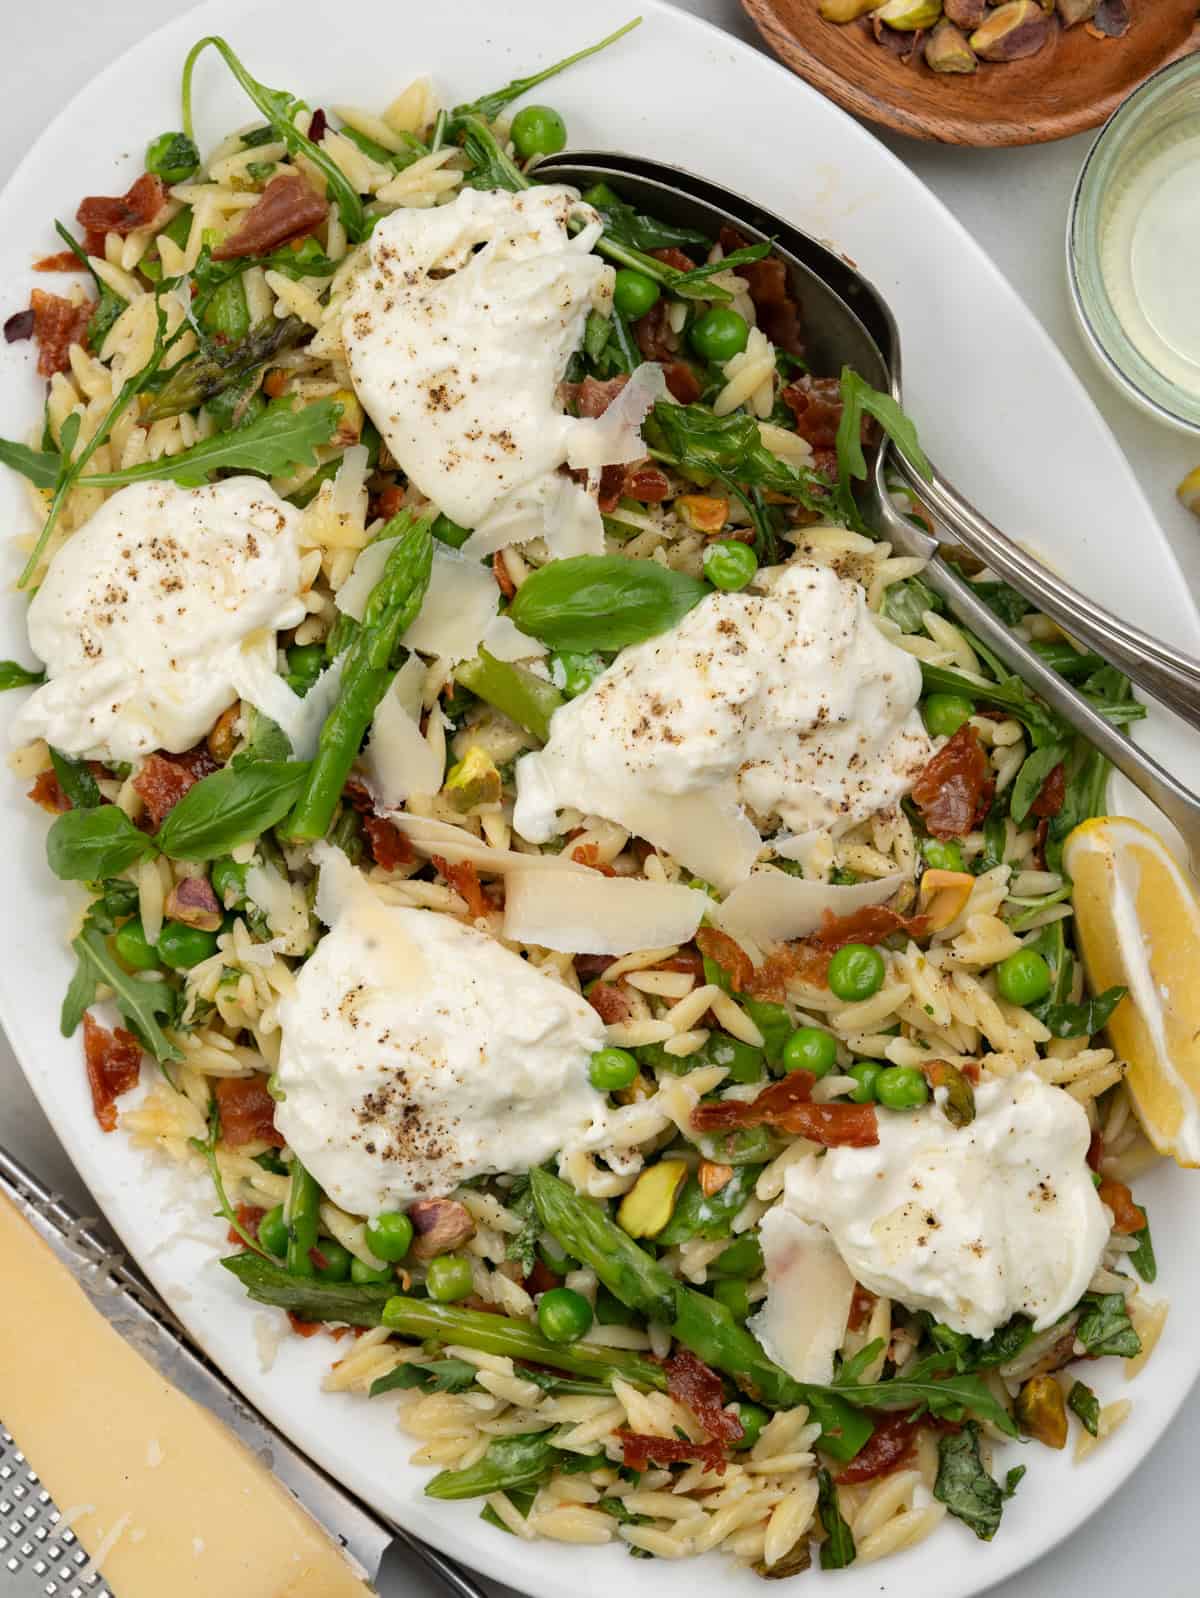 Orzo salad with spring vegetable, crispy prosciutto, pistachio dressed in EVVO, parmesan, fresh lemon juice. Topped with creamy burrata. 